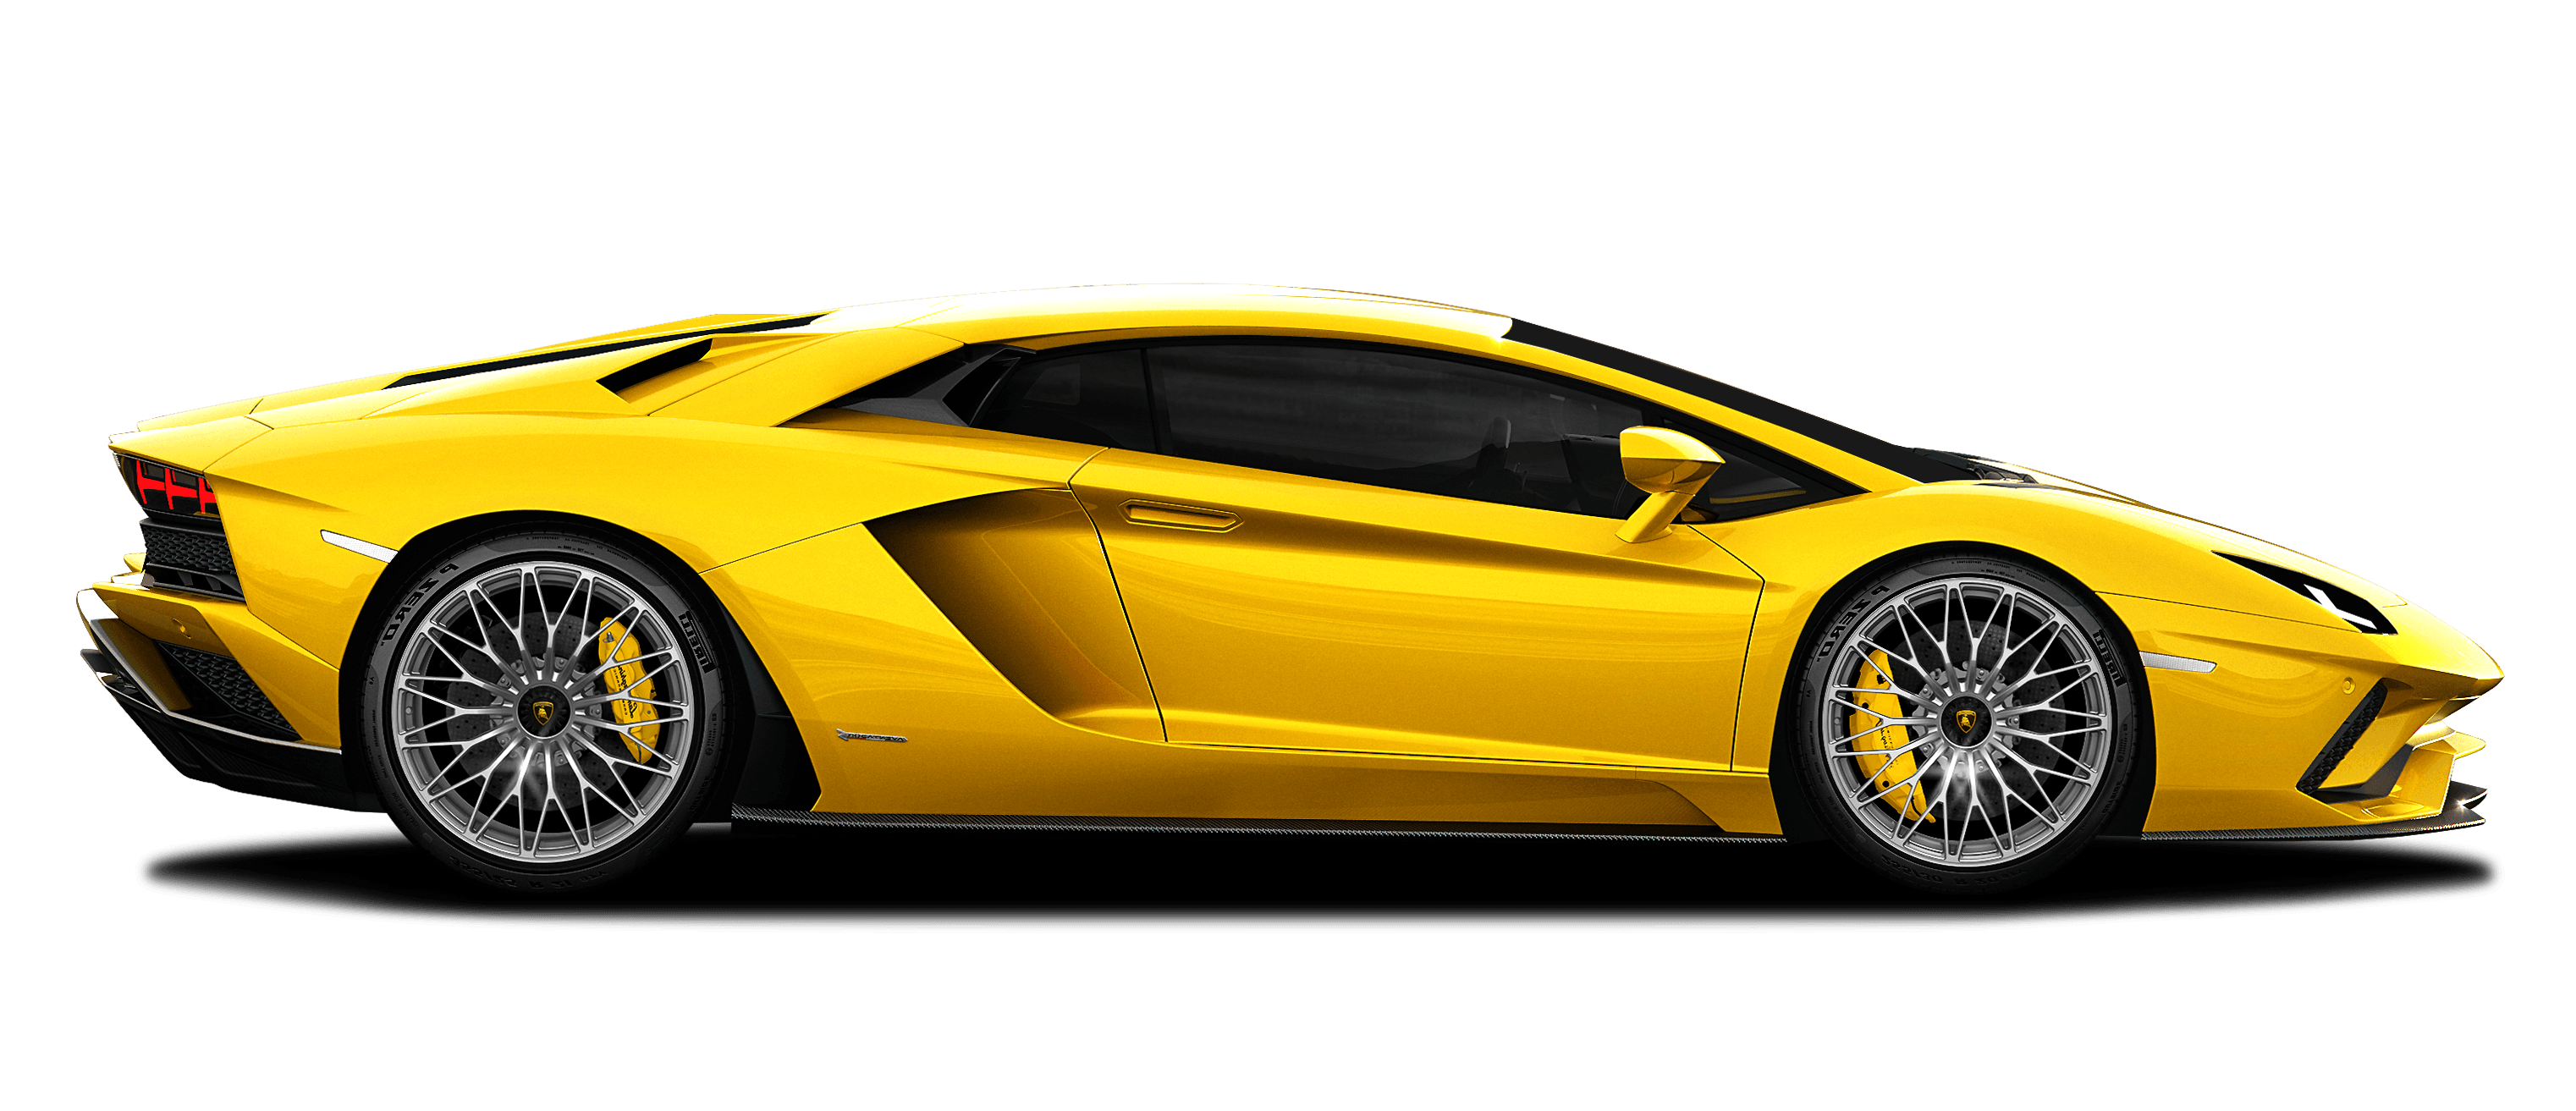 Collection of Lambo clipart Free download best Lambo.